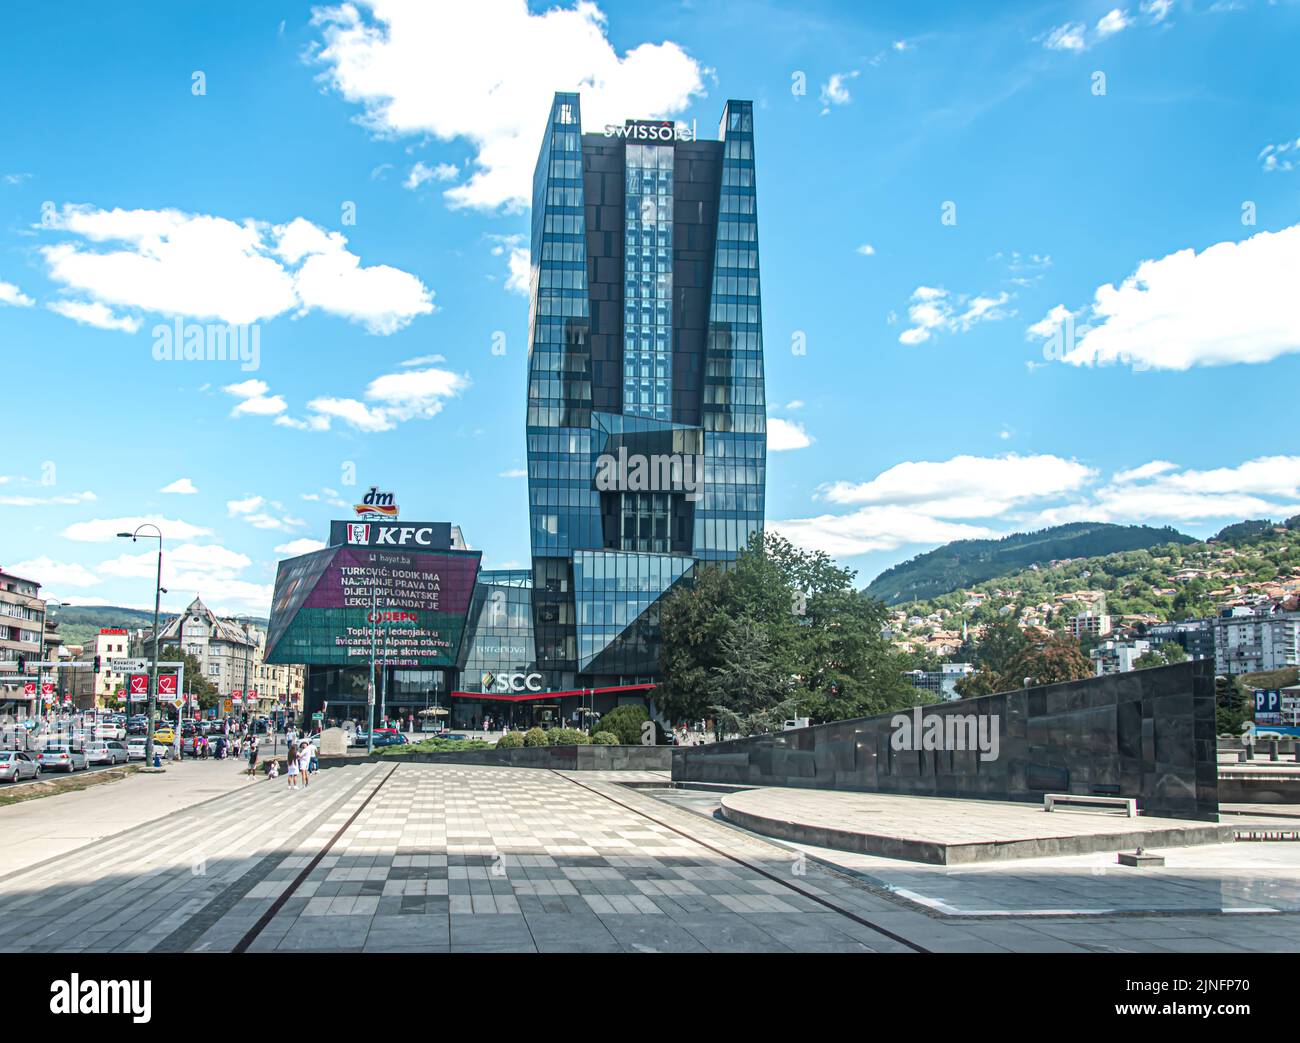 Opening the first KFC restaurant was postponed, but the KFC sign was placed on top of the SSC building in Sarajevo Stock Photo